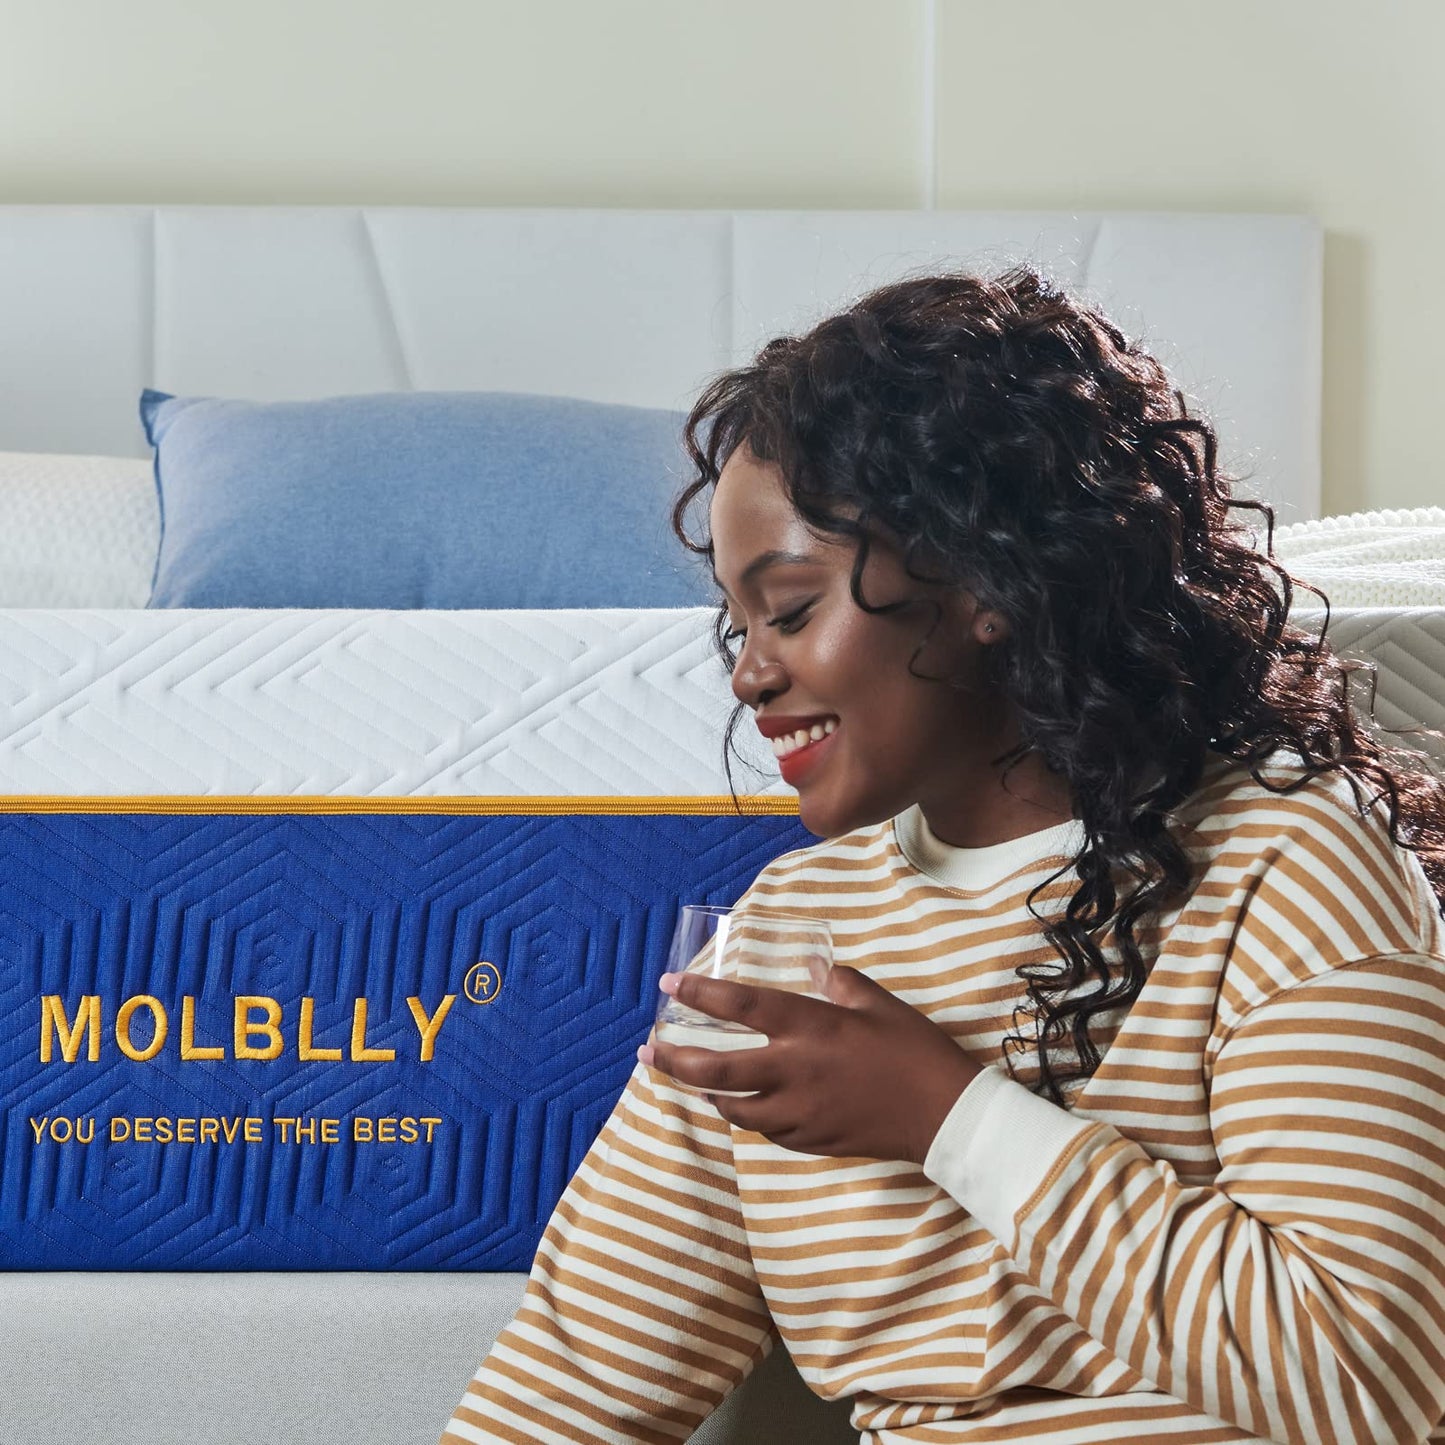 Molblly Queen Mattress, 10 Inch Cooling-Gel Memory Foam Mattress Bed in a Box,Cool Queen Bed Supportive & Pressure Relief with Breathable Soft Fabric Cover,Premium